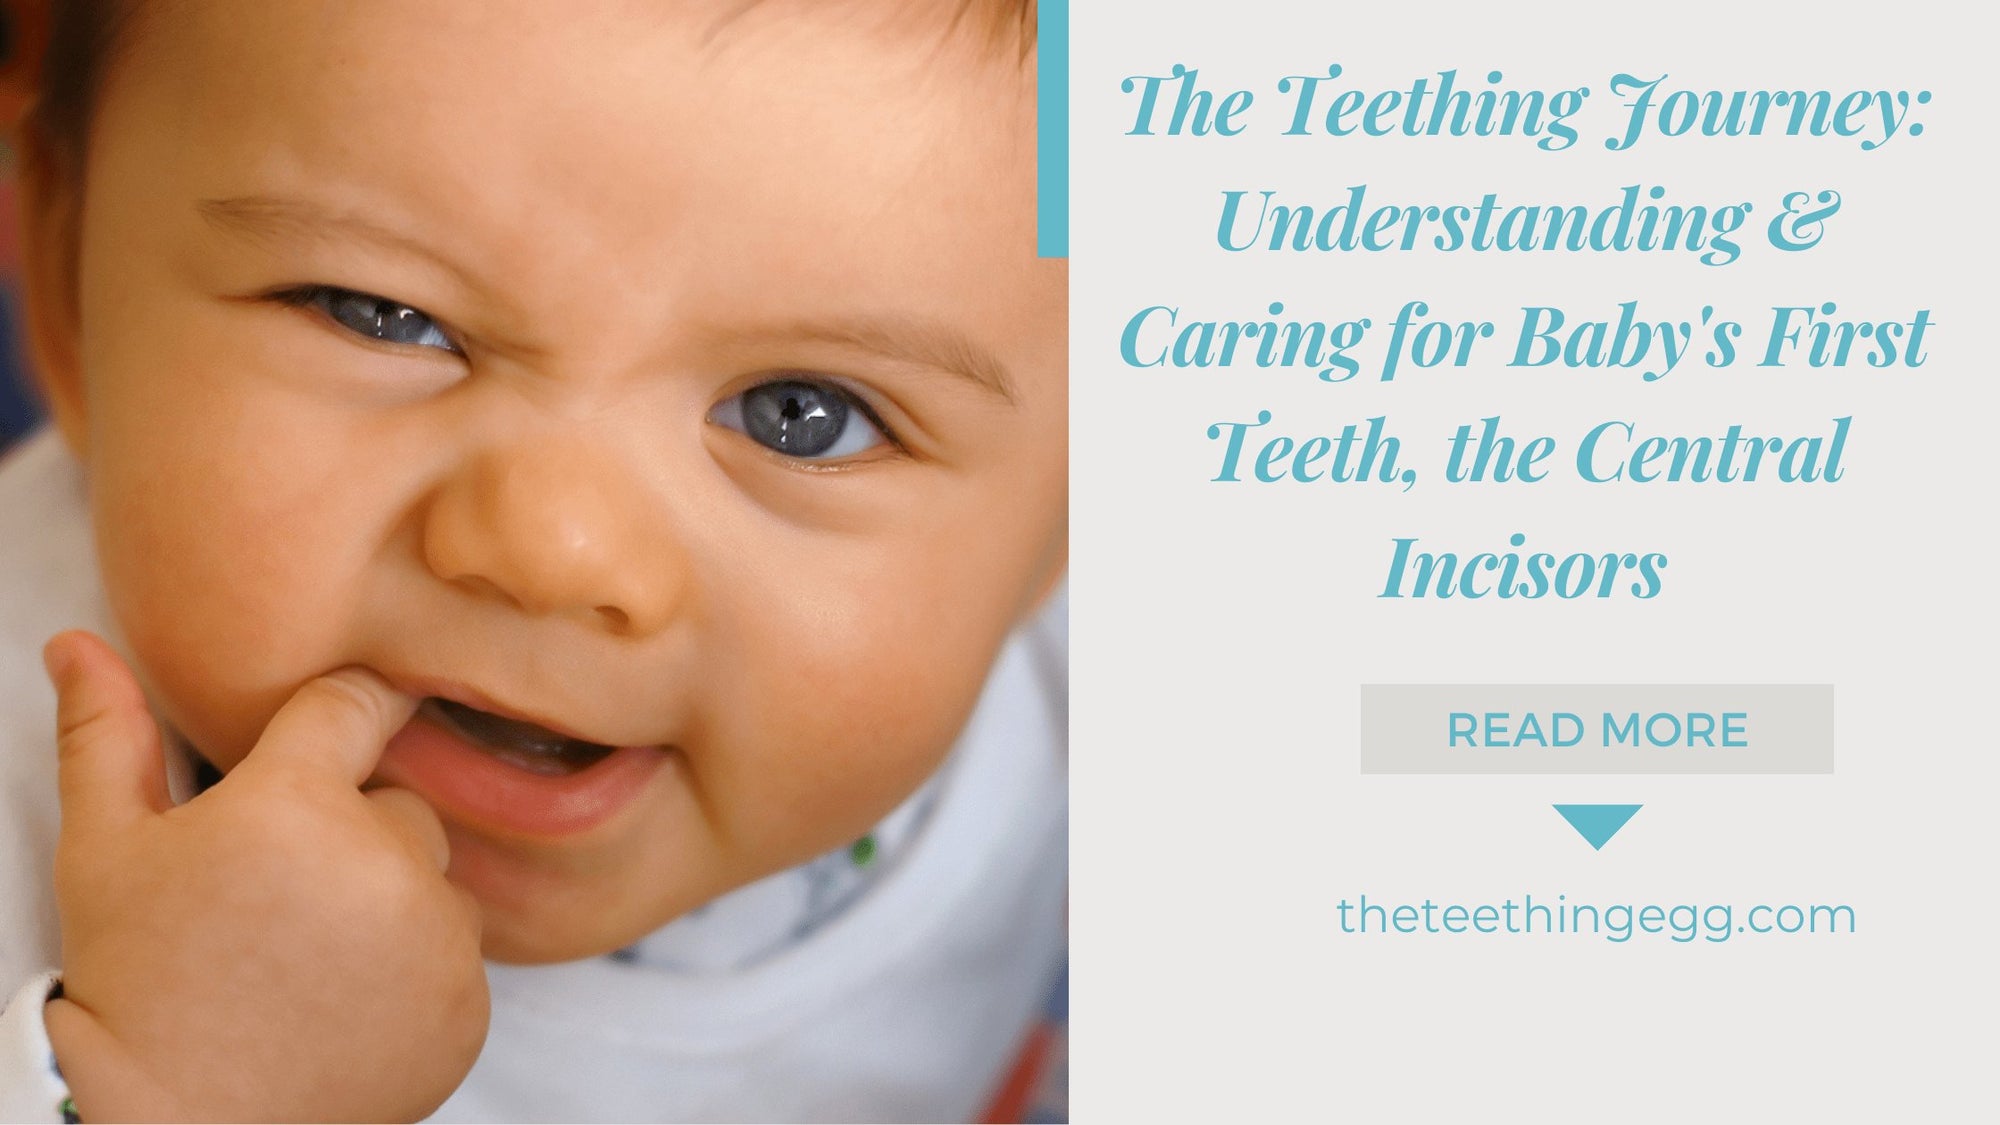 The Teething Journey: Understanding, Supporting, and Caring for Baby's First Teeth, the Central Incisors